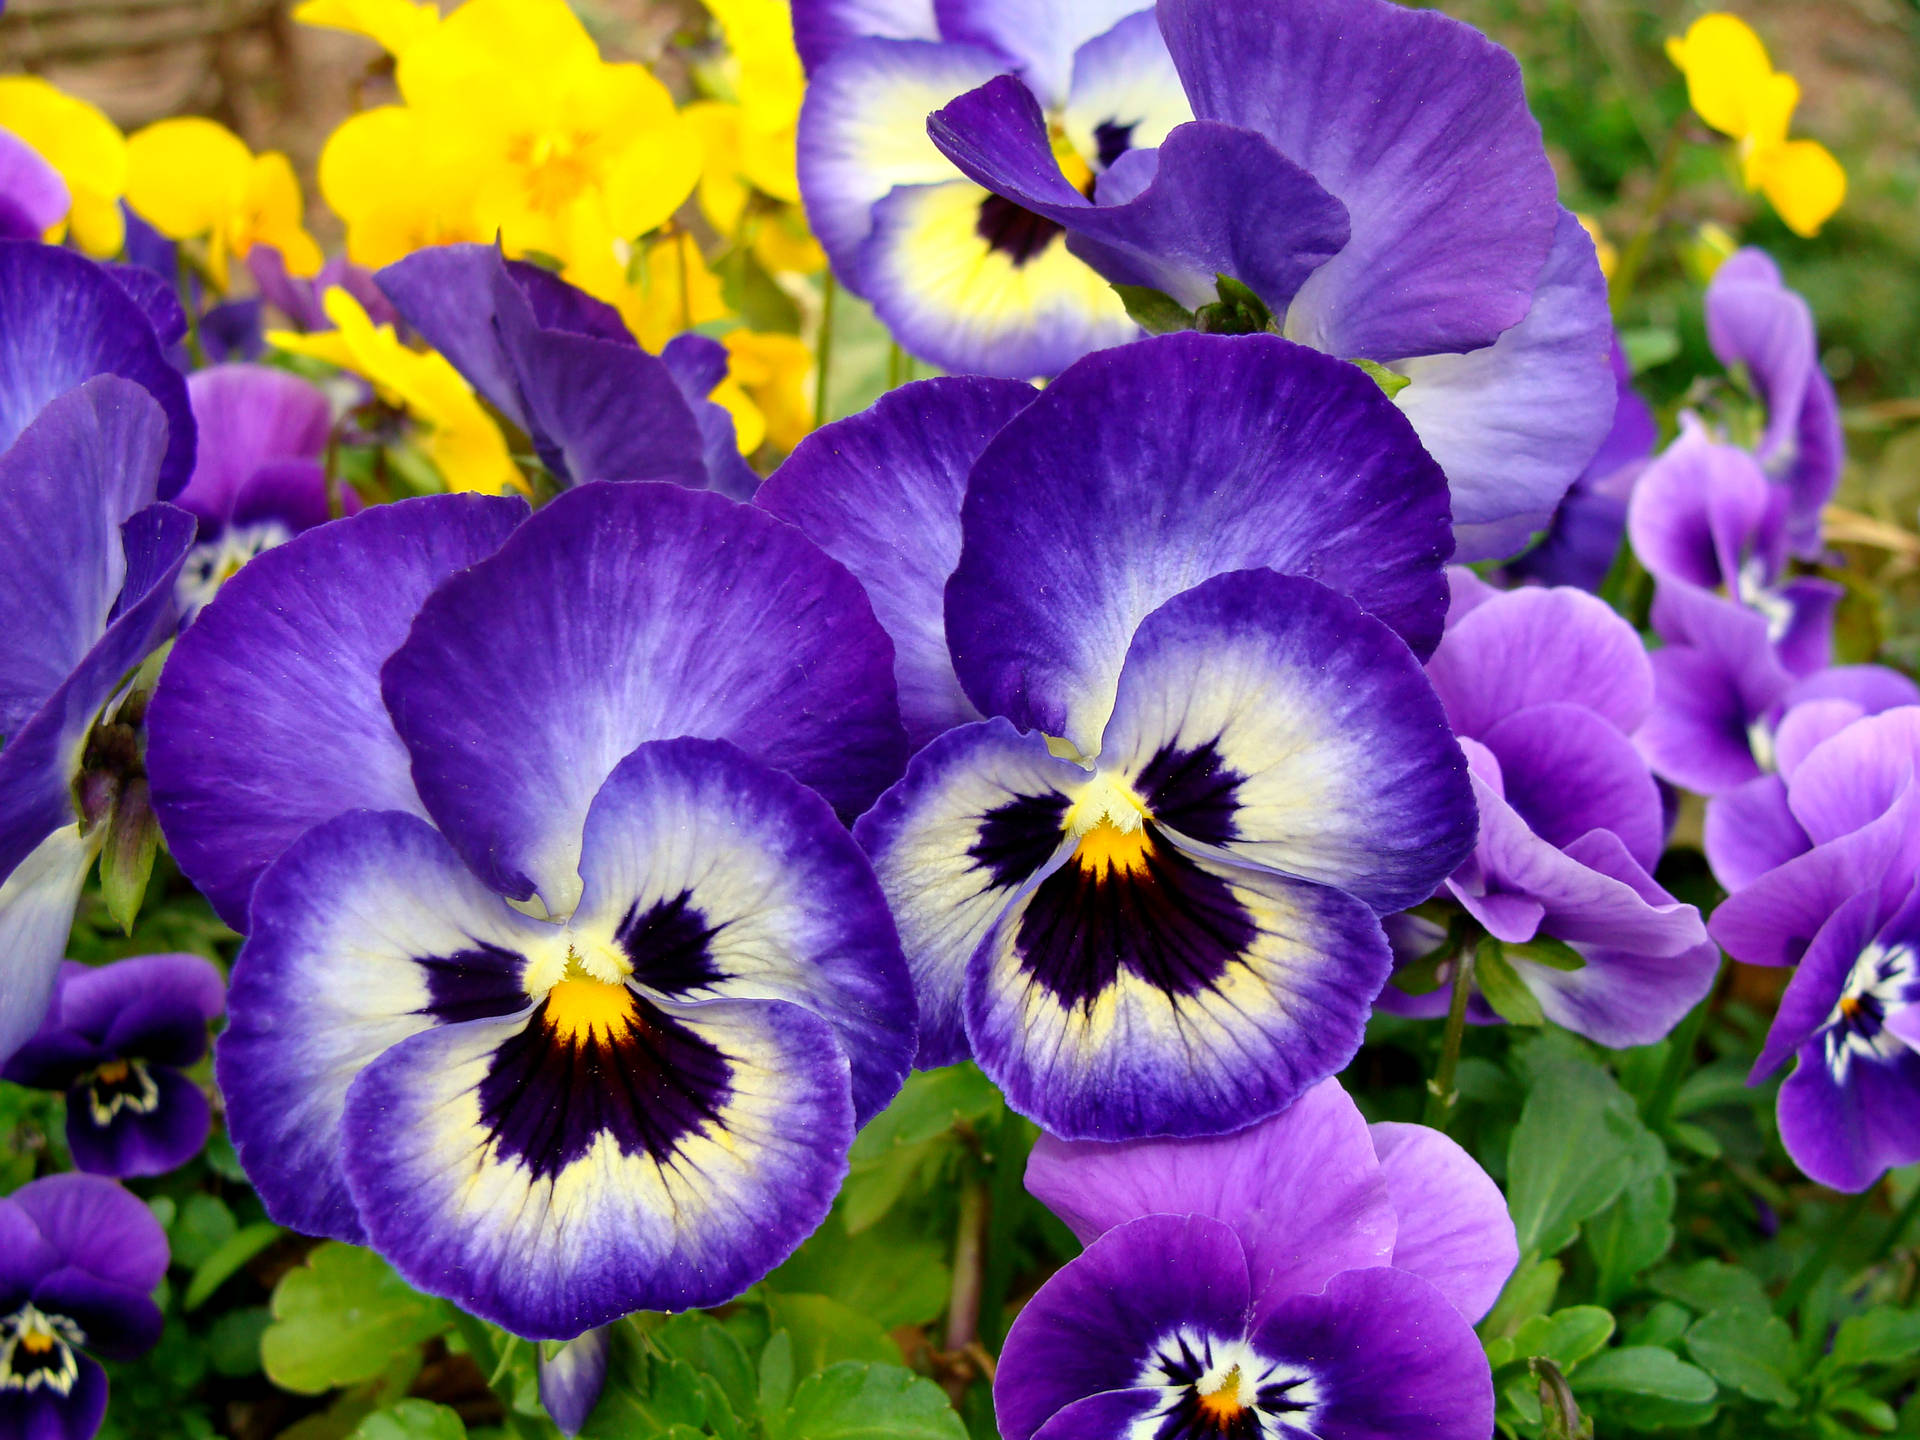 Captivating Purple Pansy Blooms in Garden Wallpaper